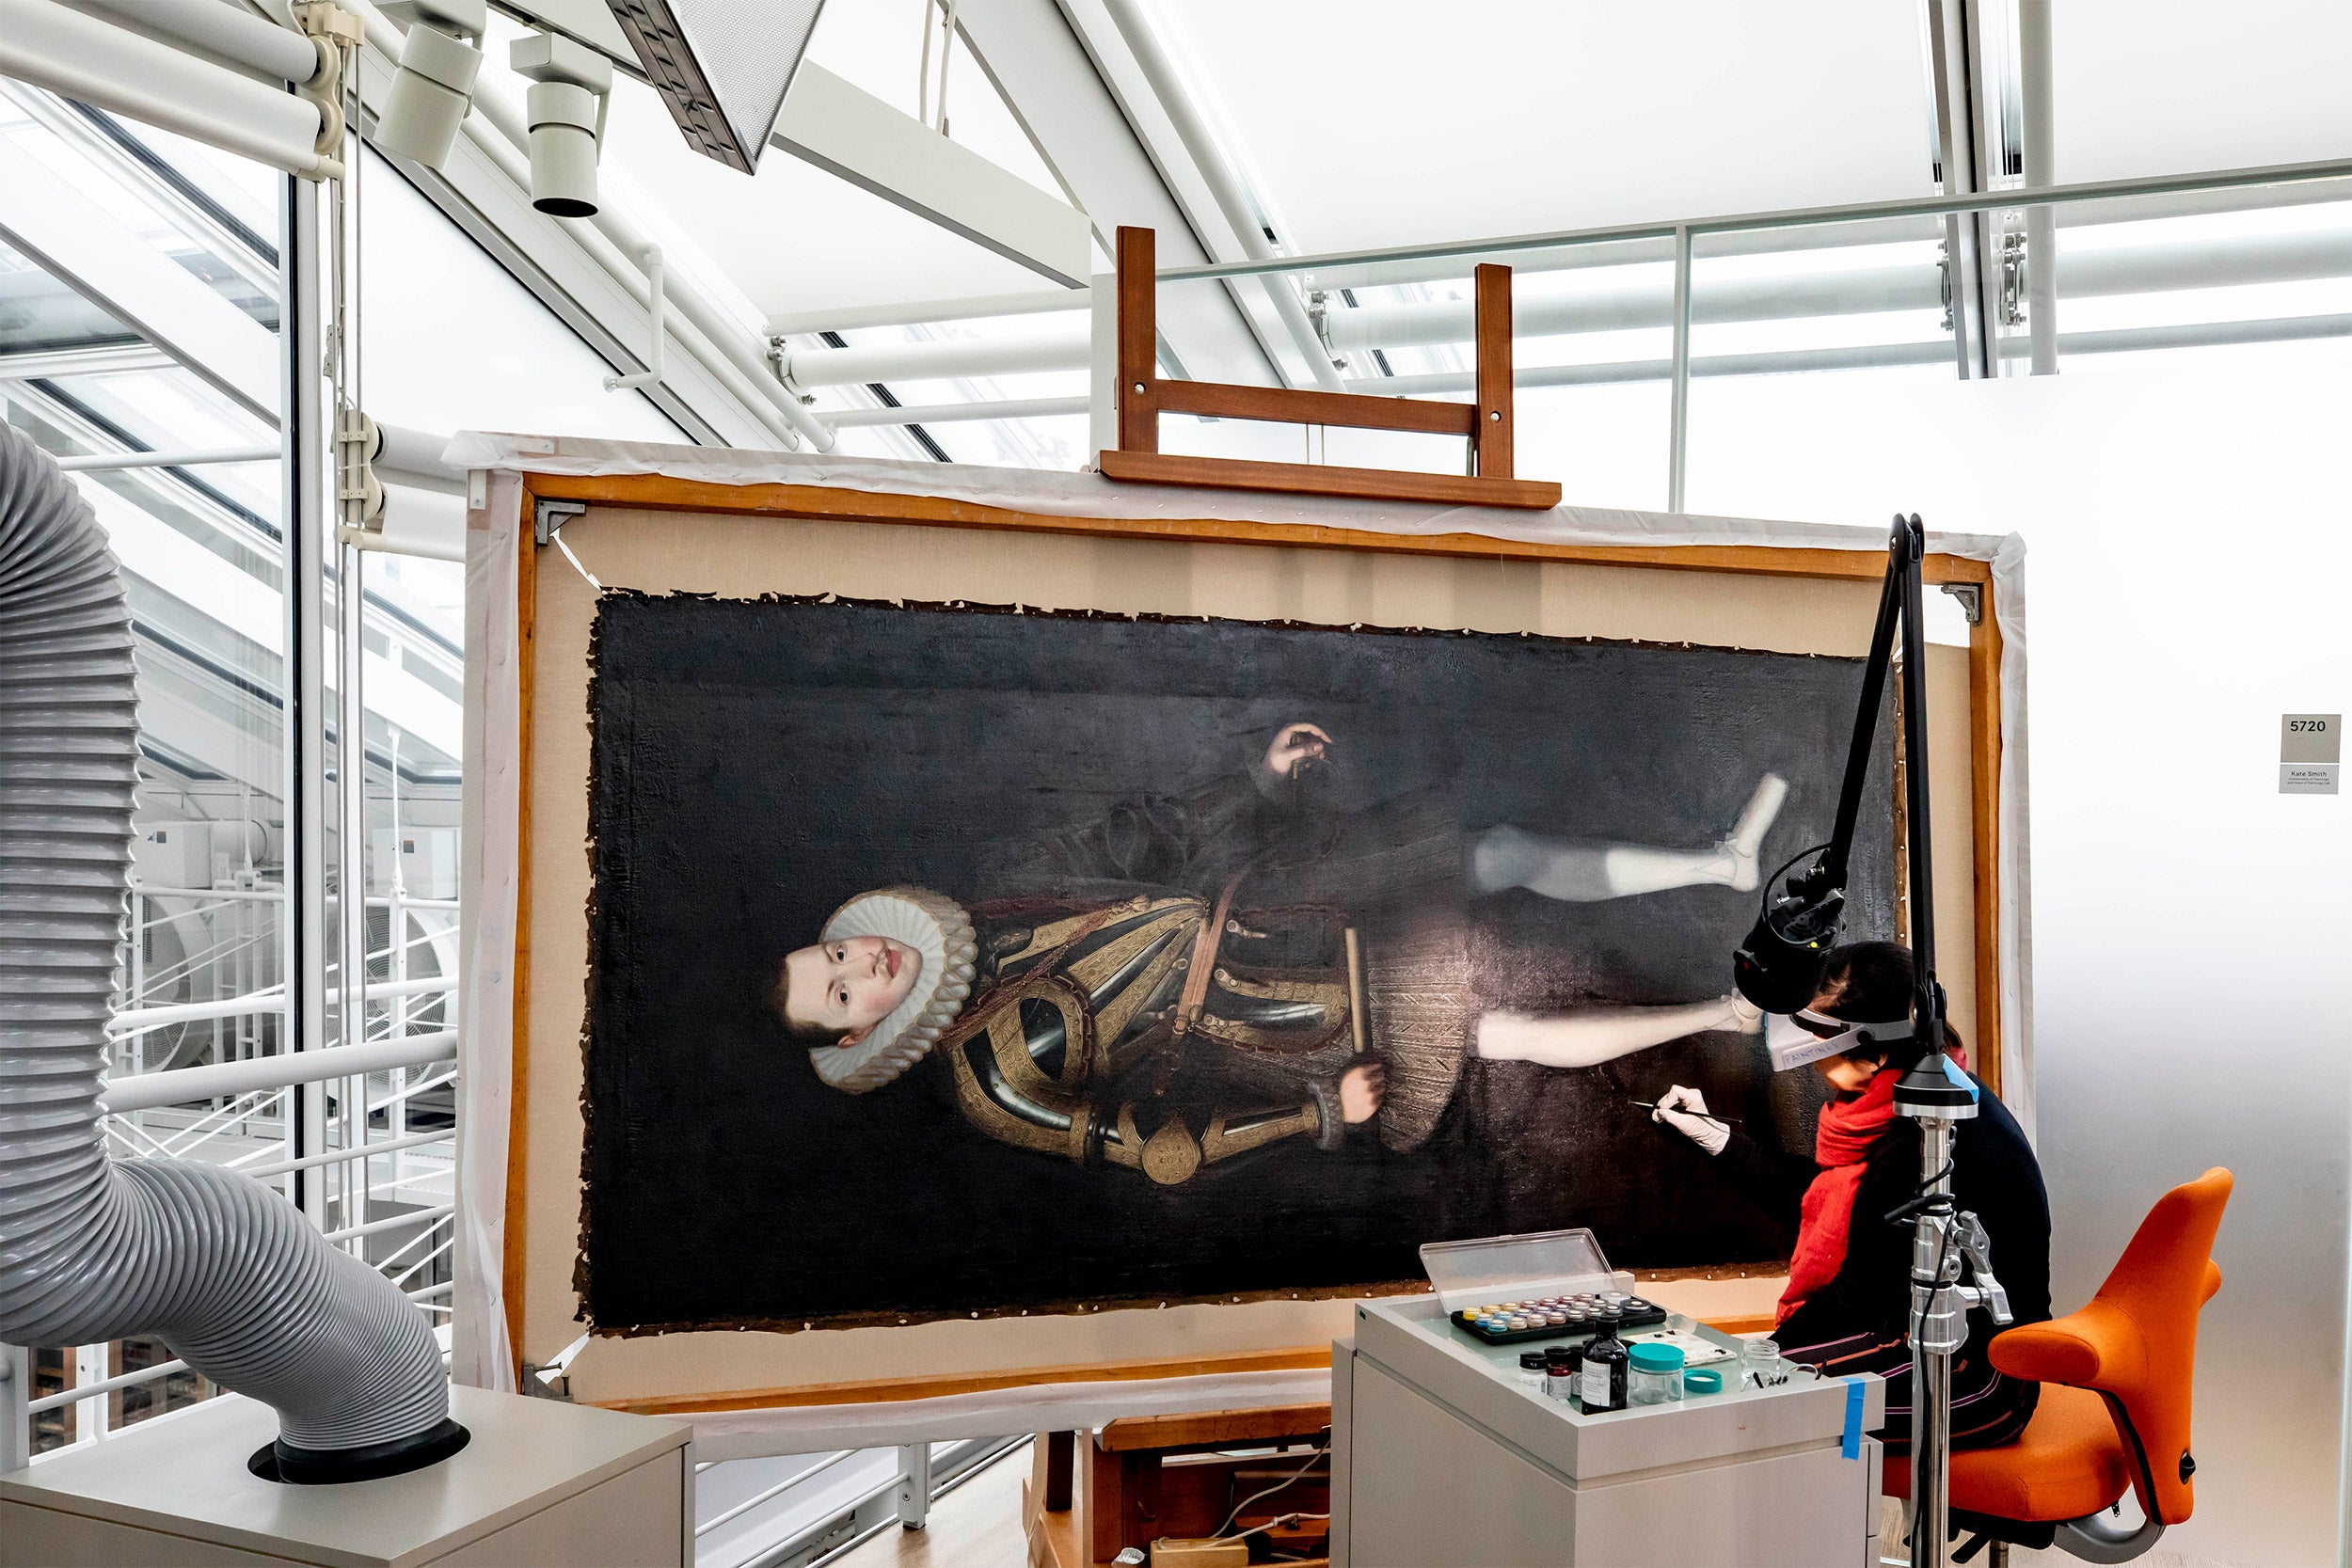 Curator restores a large painting.